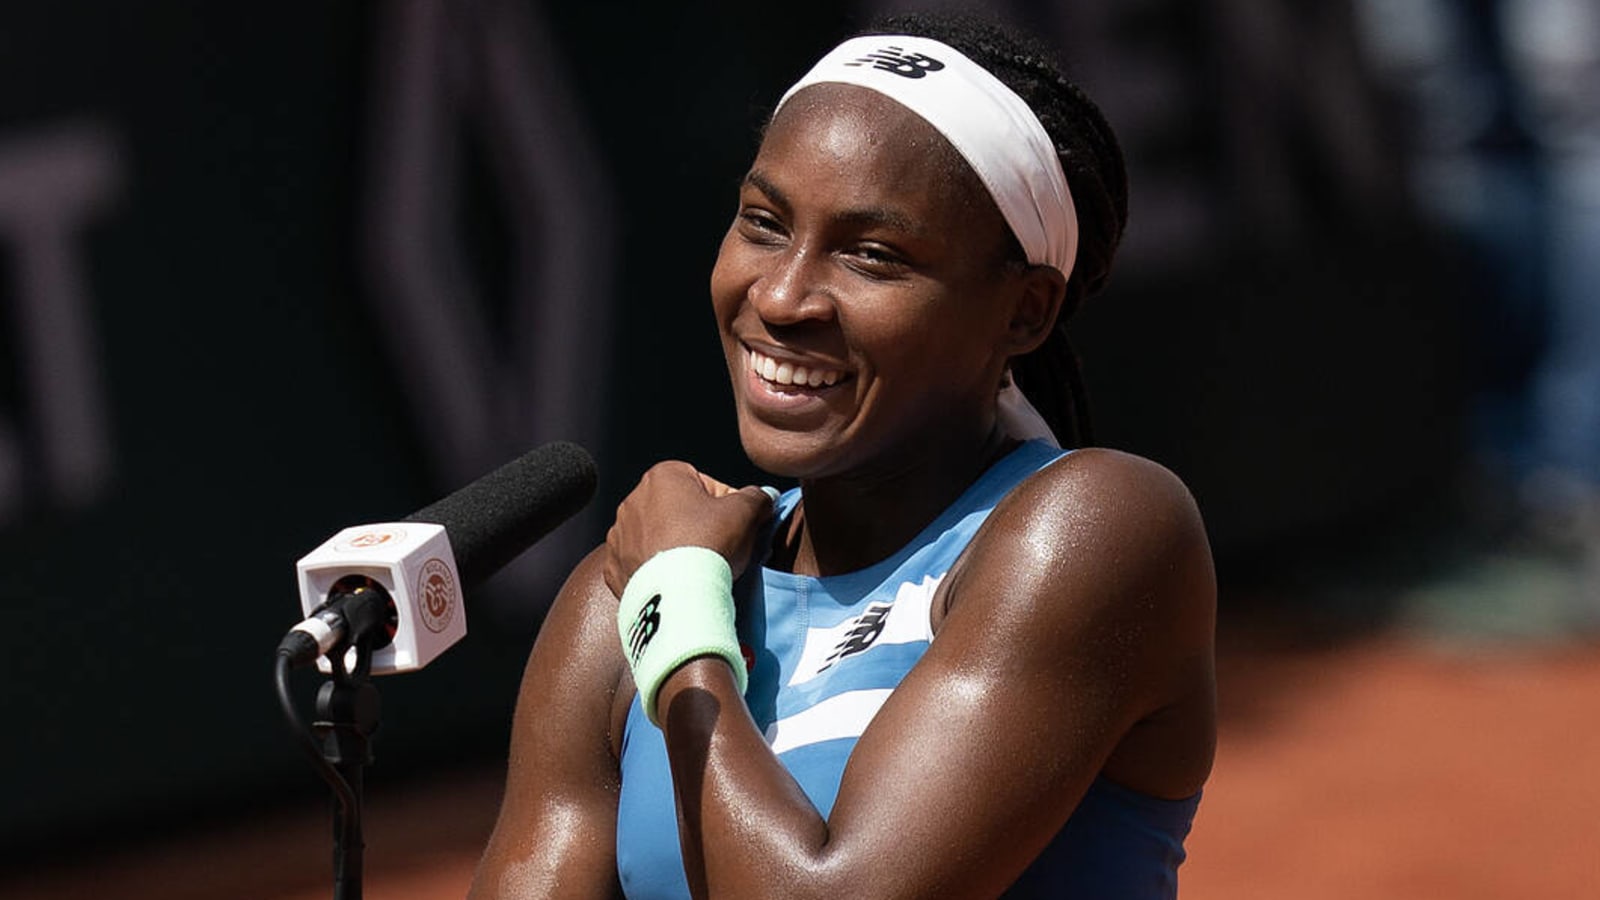 Tennis star Coco Gauff shares incredible Jimmy Butler story